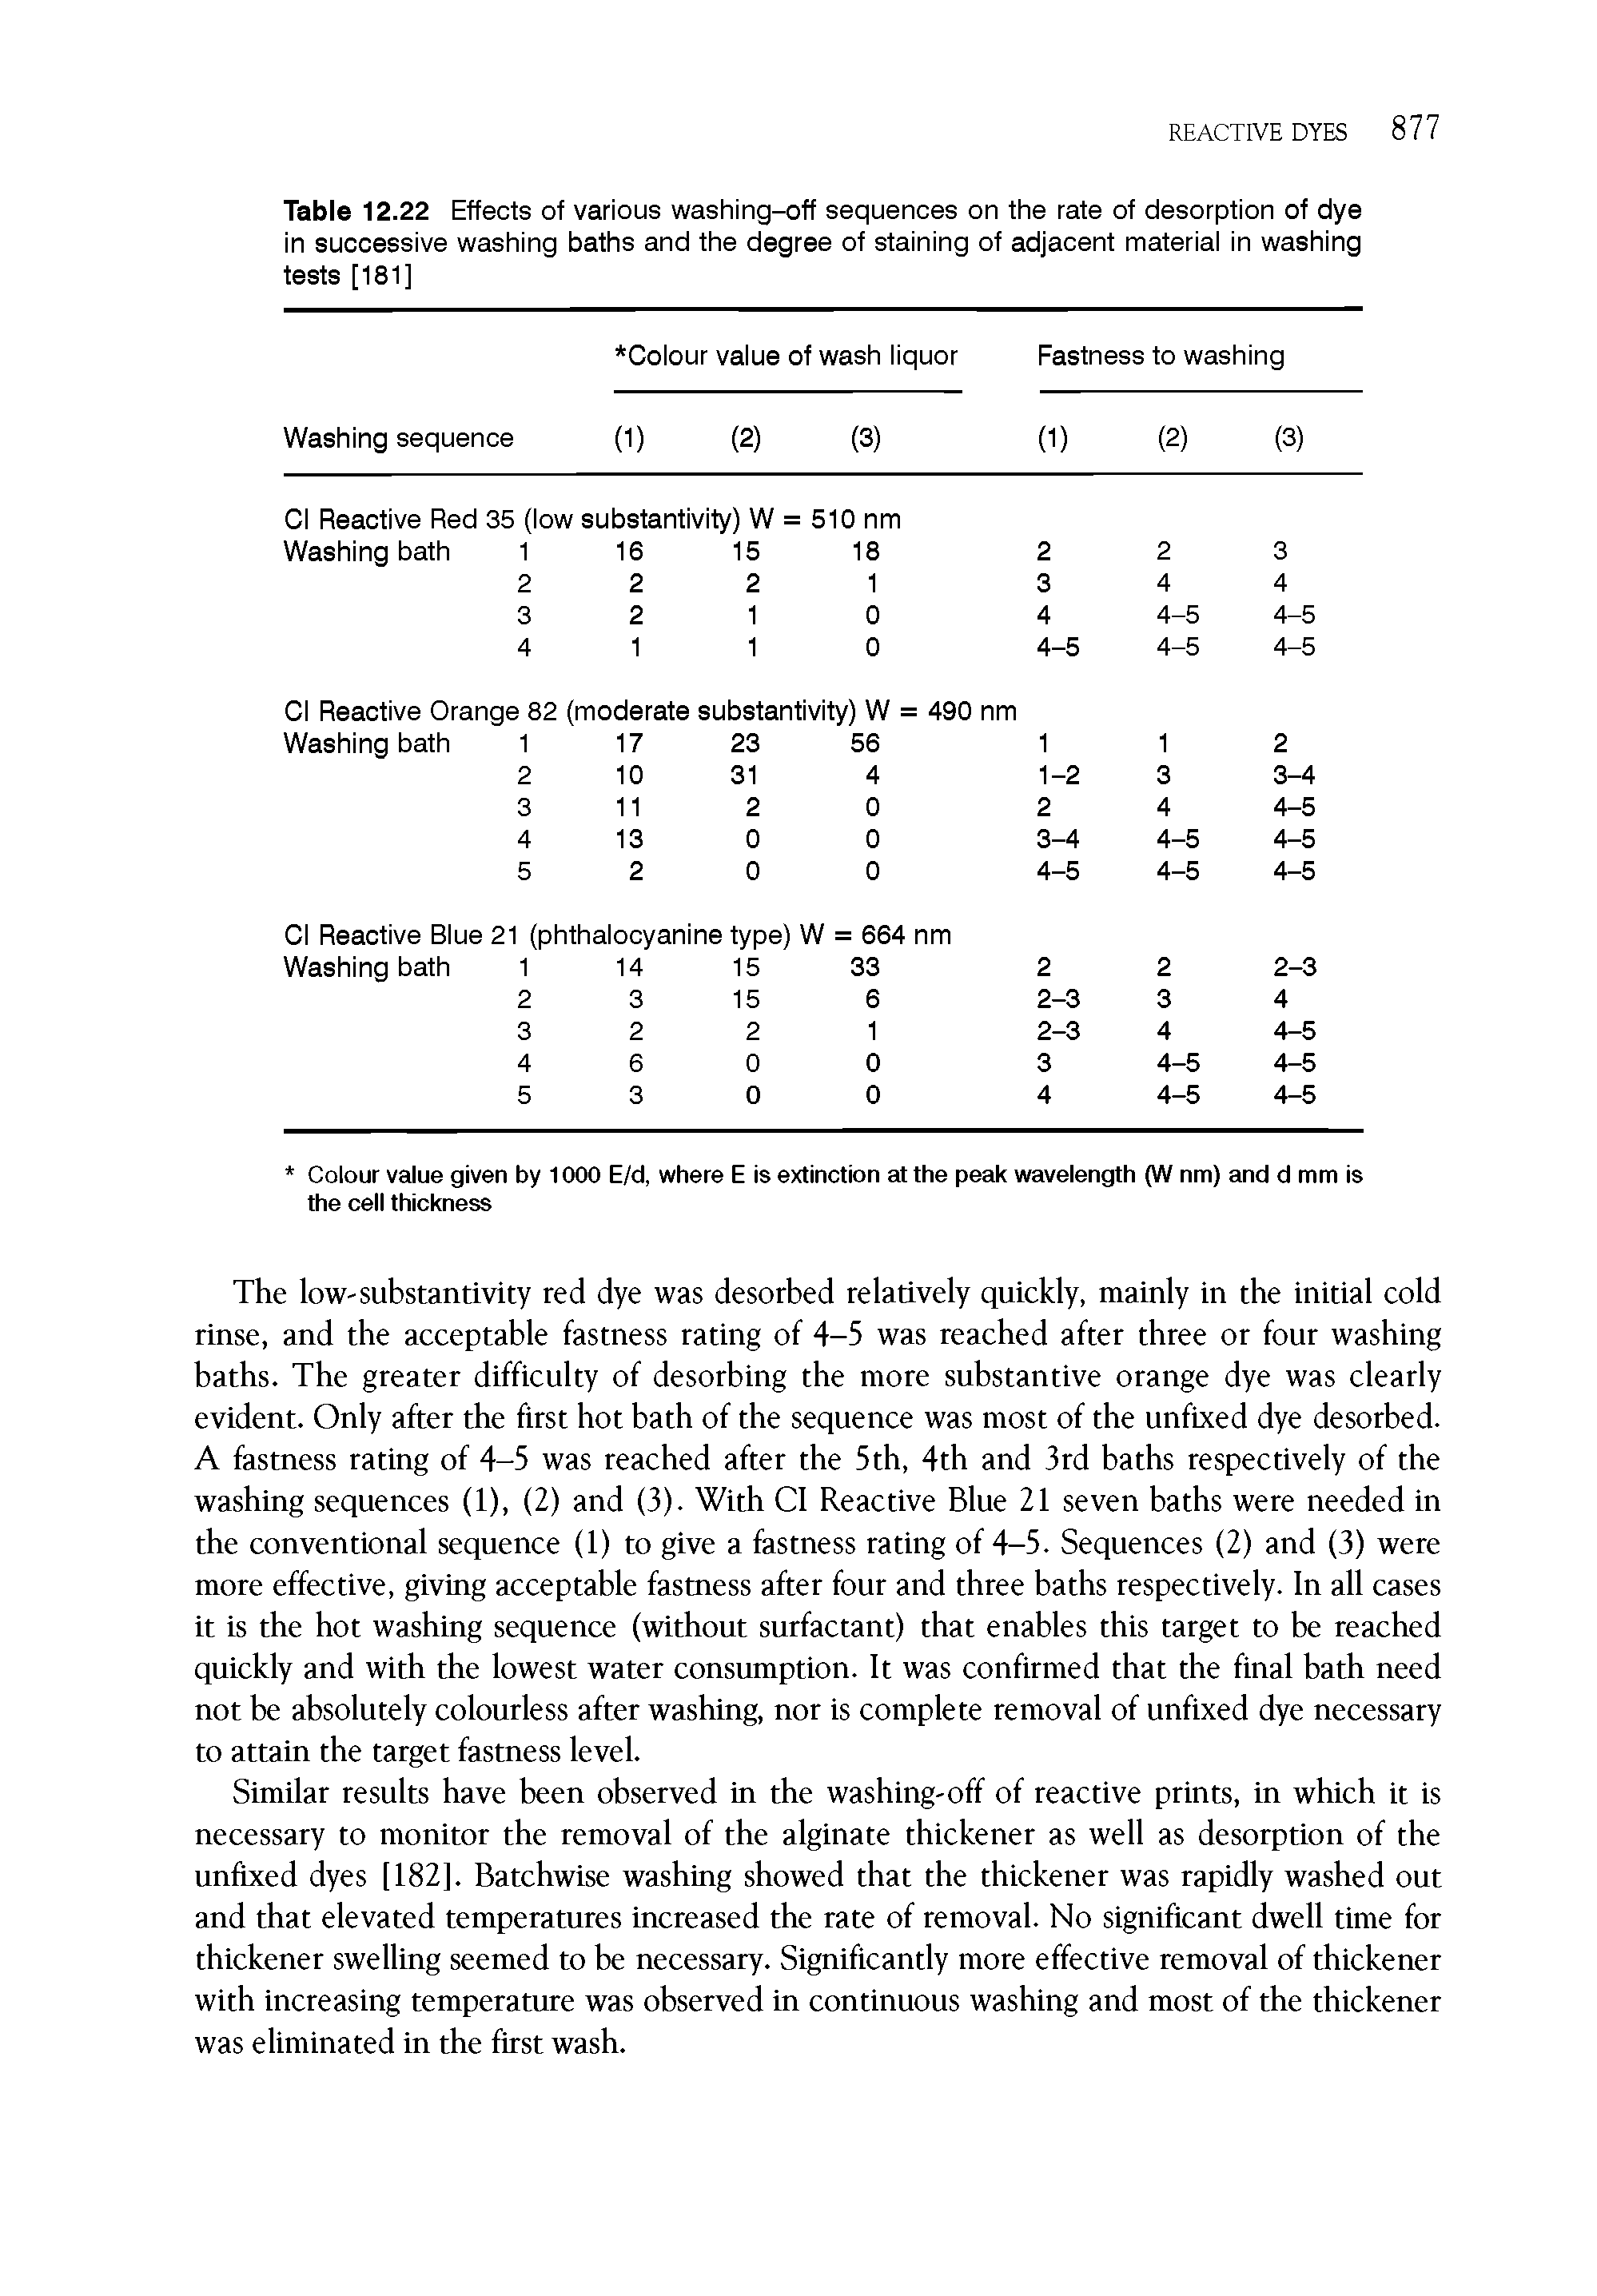 Table 12.22 Effects of various washing-off sequences on the rate of desorption of dye in successive washing baths and the degree of staining of adjacent material in washing tests [181]...